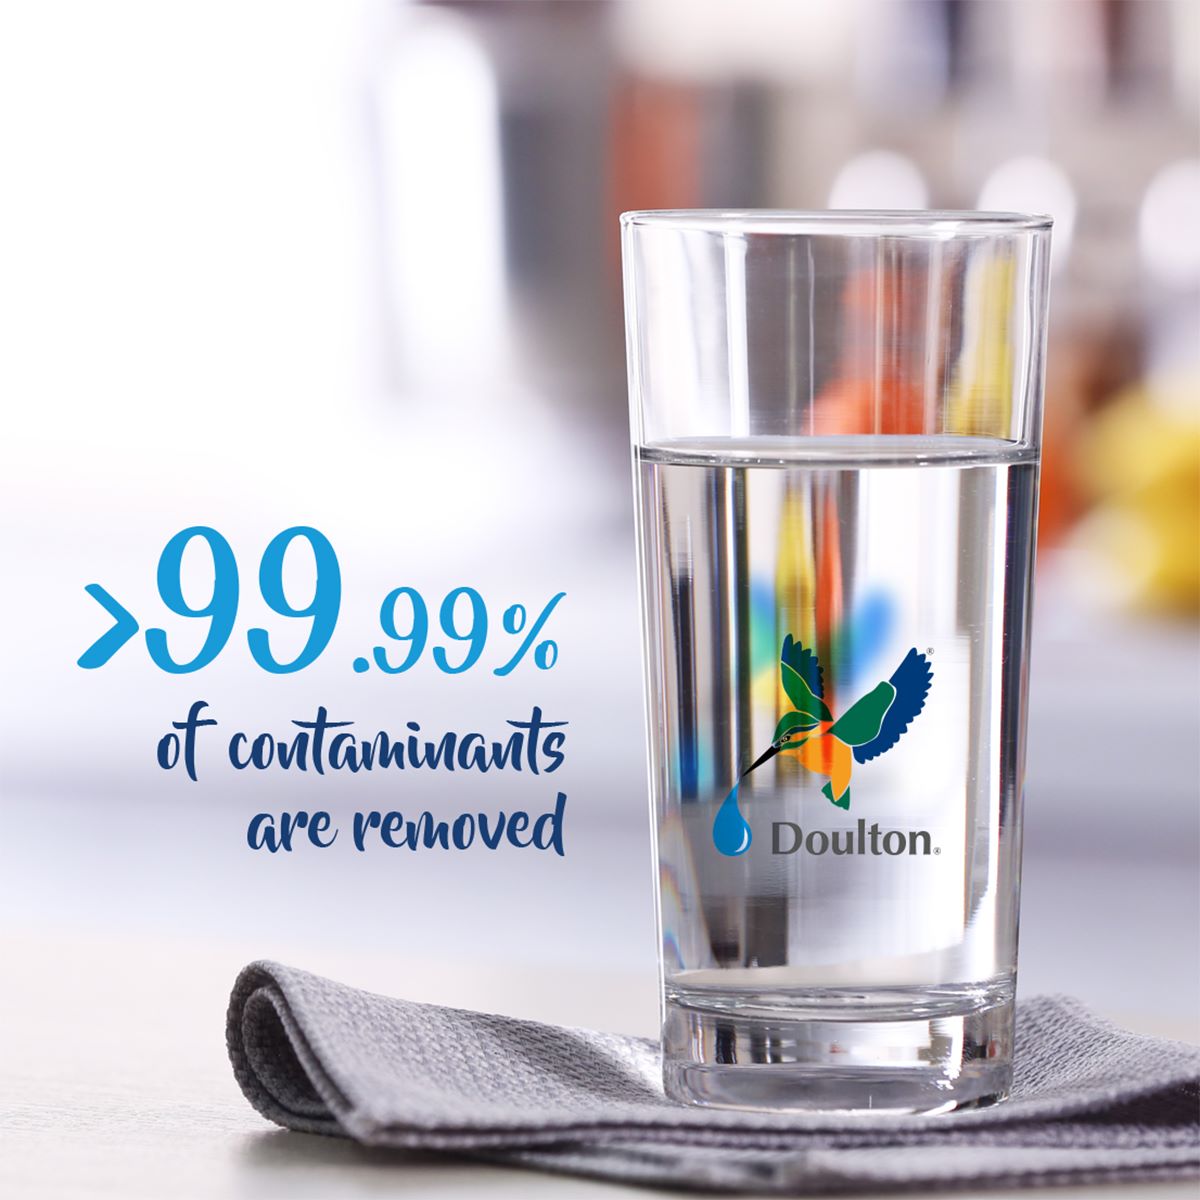 Doulton Water Filters! Good Water Comes Naturally, Everyday!